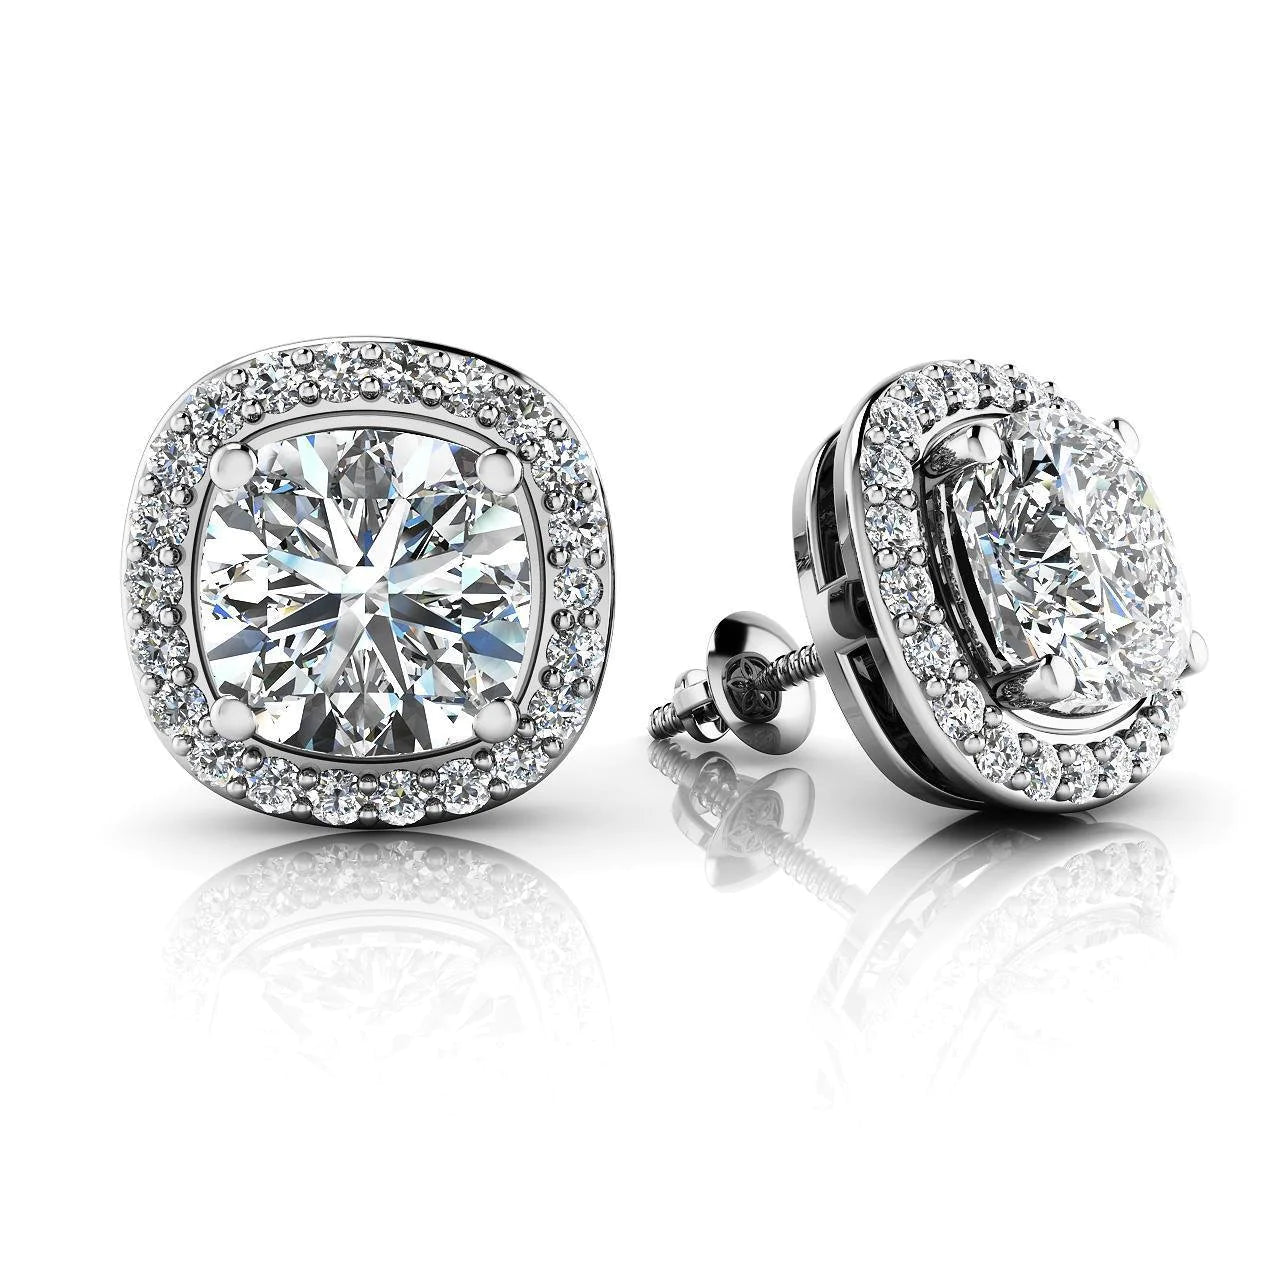 Cushion And Round Cut 3.44 Ct Real Diamonds Stud Halo Earrings White Gold 14K